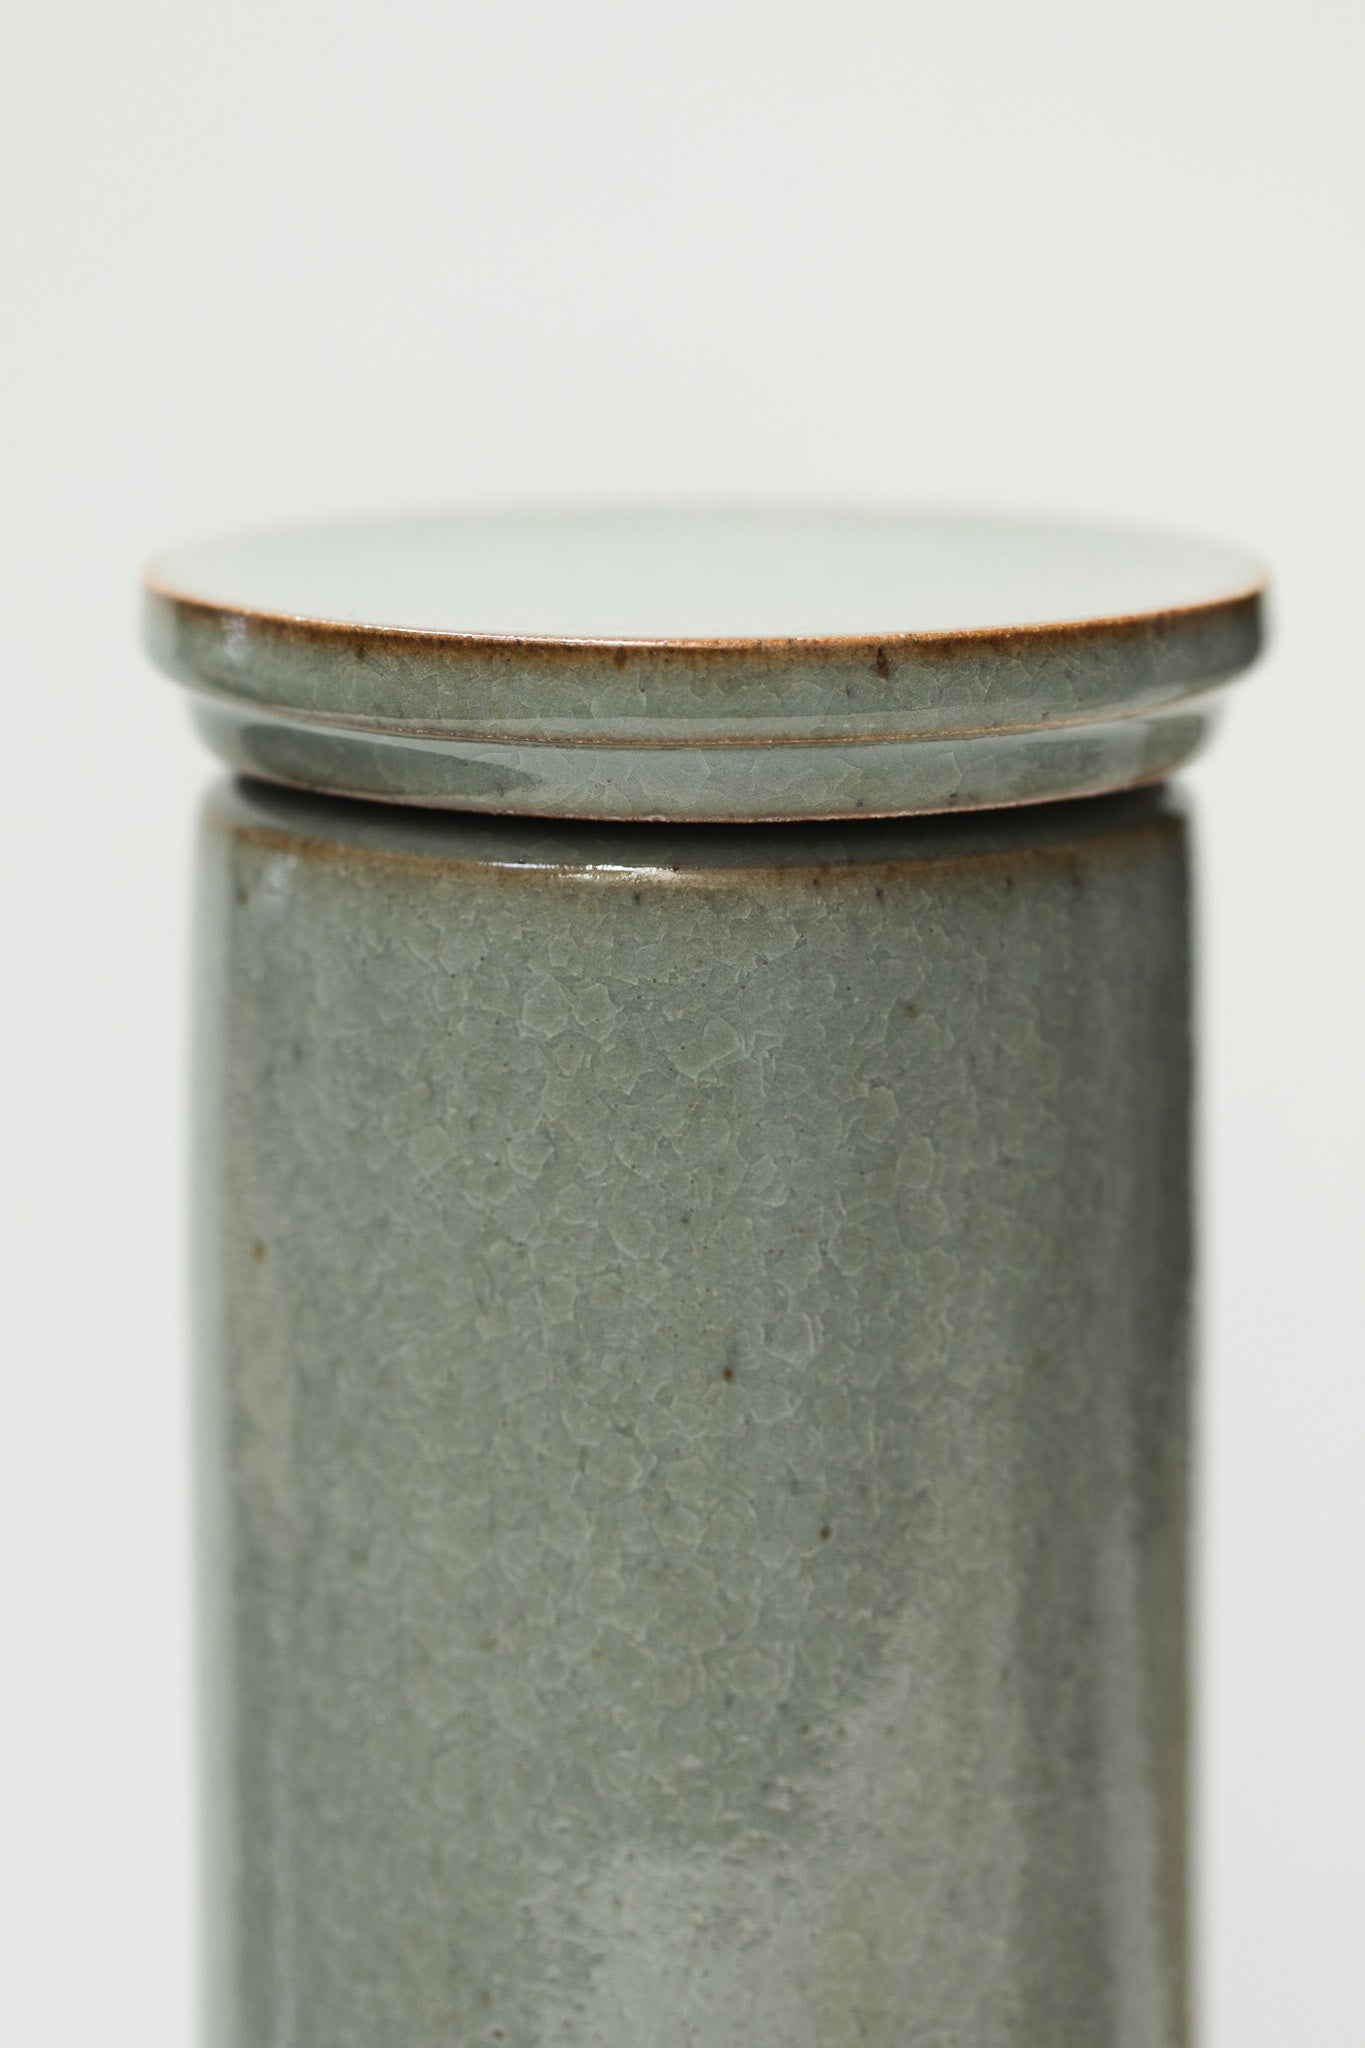 Florian Gadsby: Jar with Stepped Lid